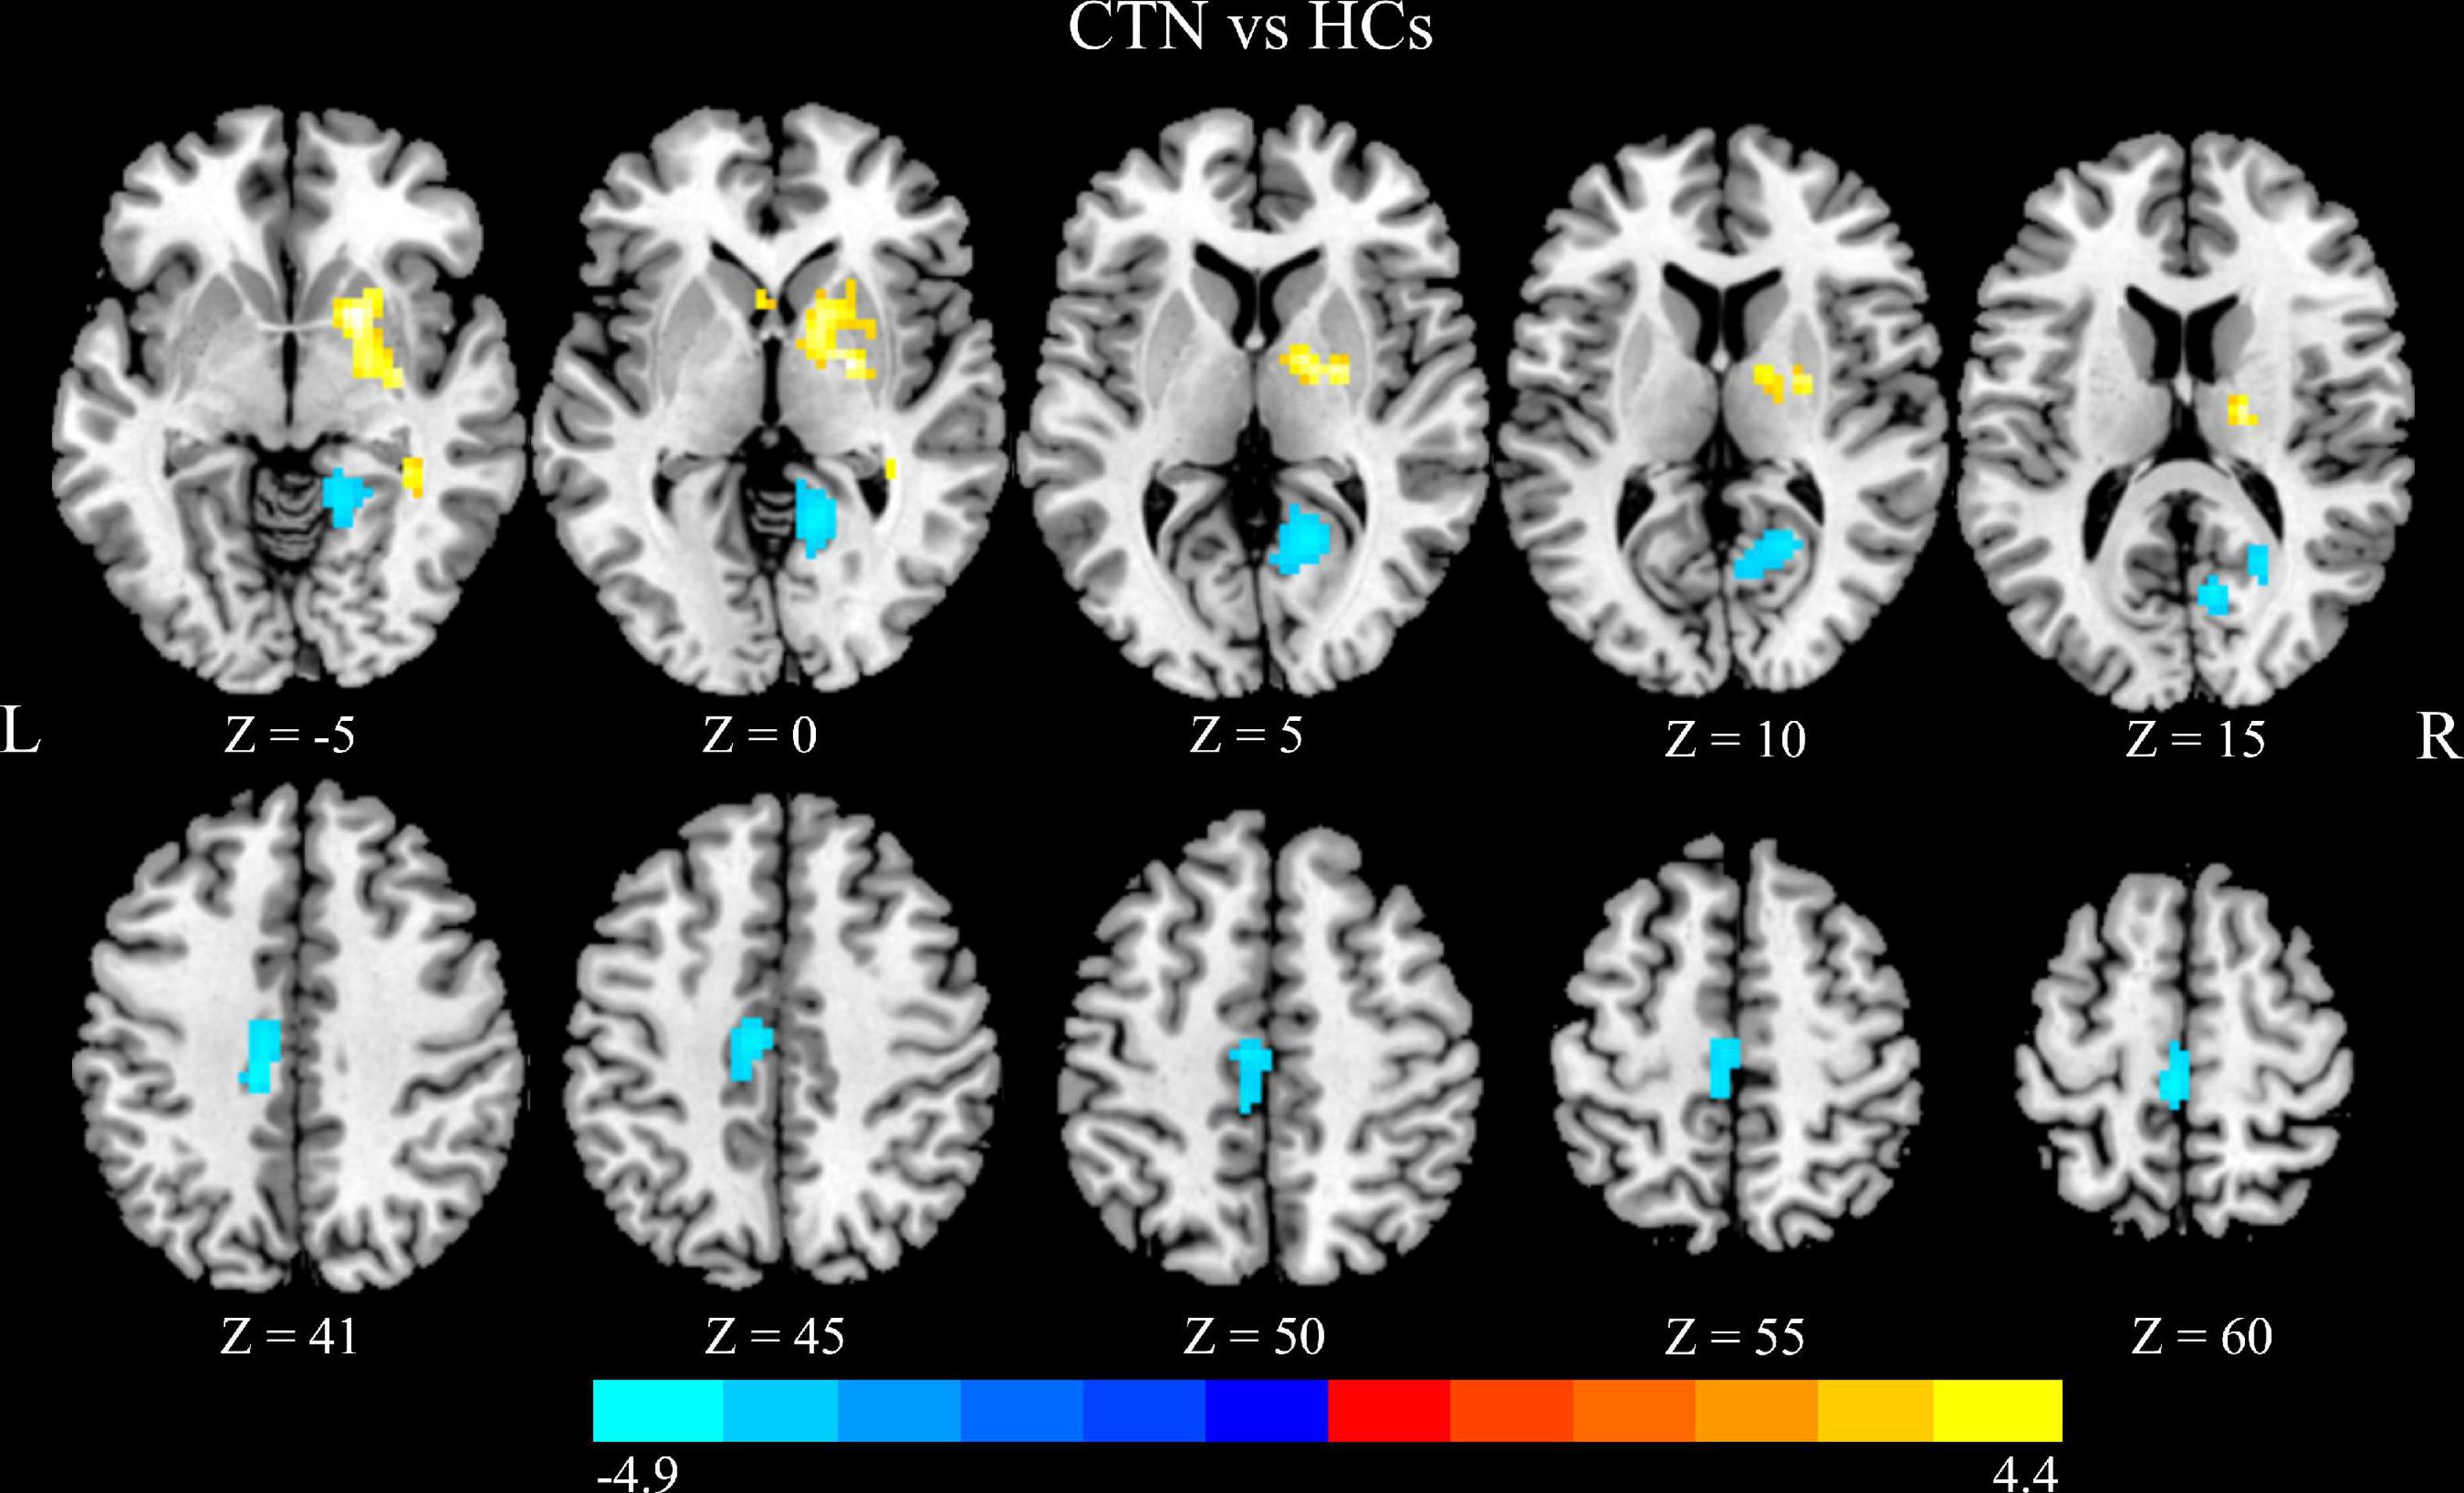 Alterations of degree centrality and functional connectivity in classic trigeminal neuralgia